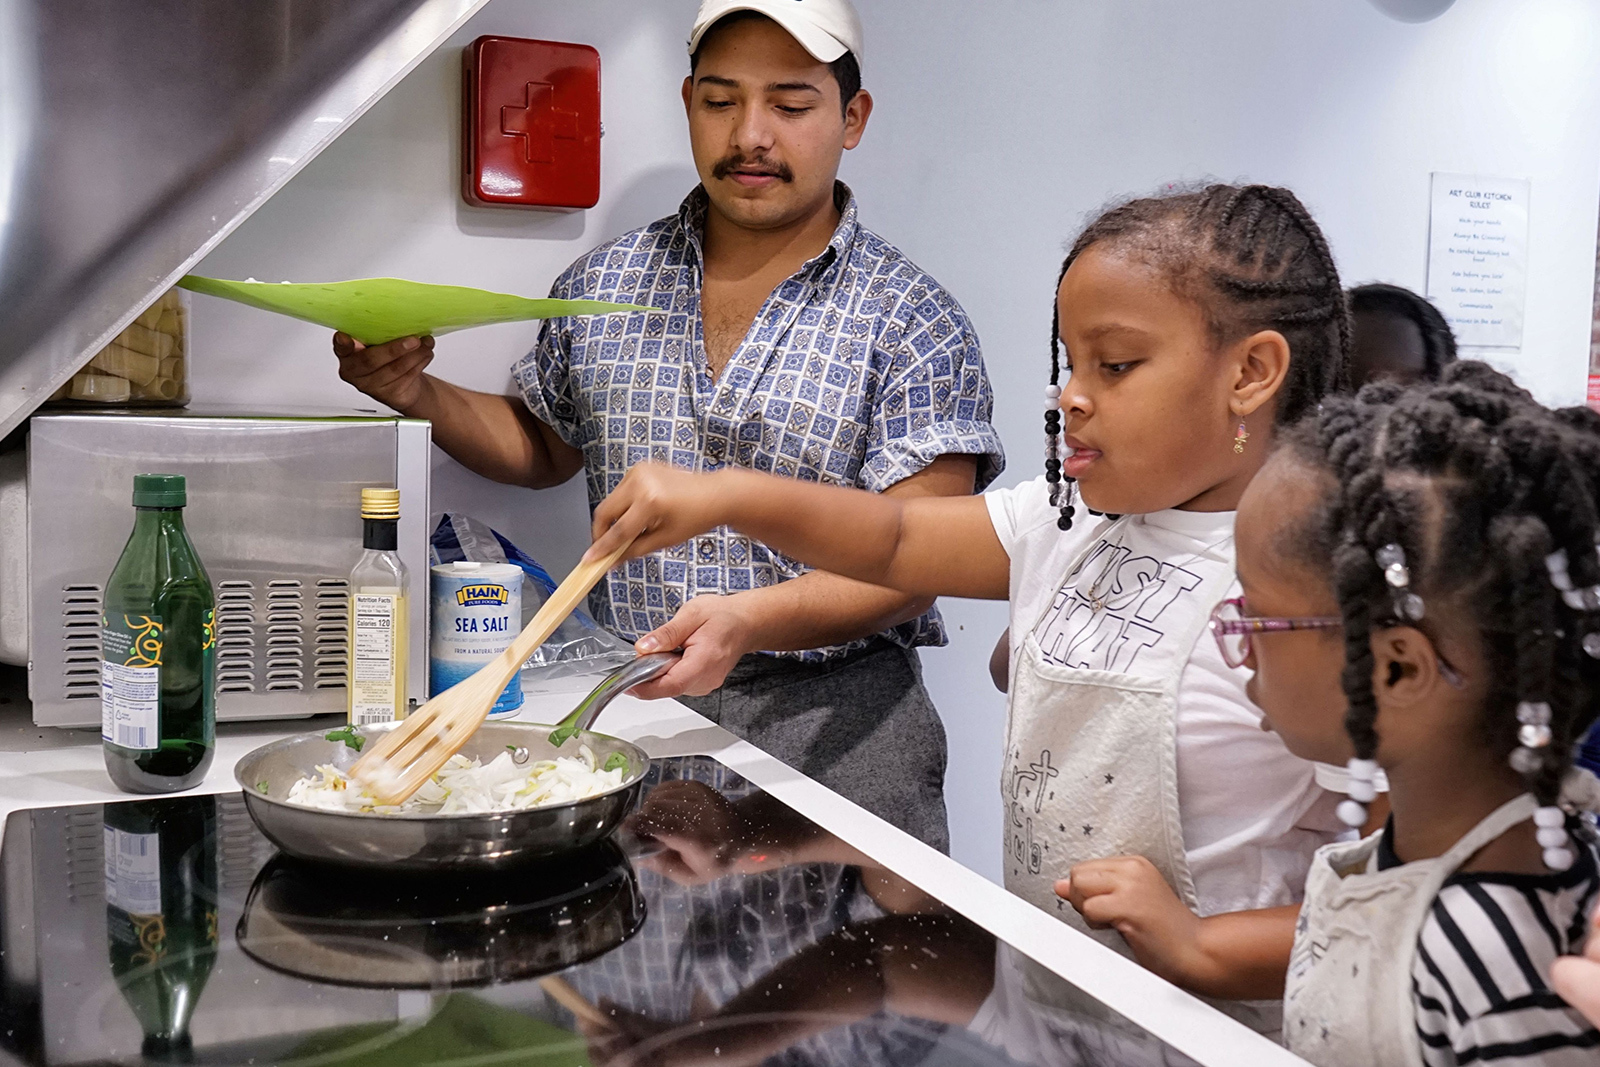 A teaching artist helps two young girls sautee onions in a pan